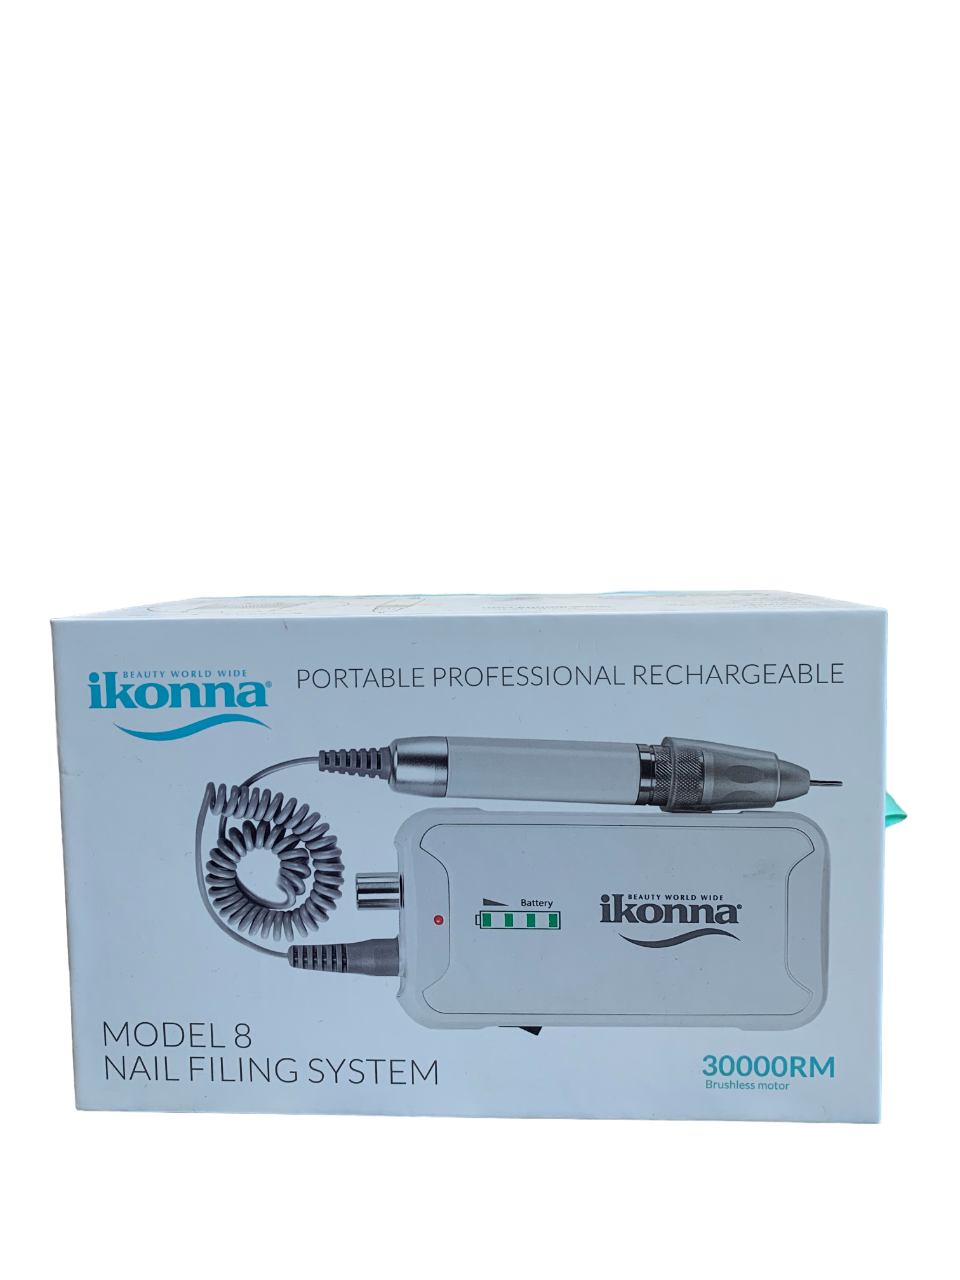 Ikonna Portable Professional Rechargeable Model 8 Nail Filing 30000RM